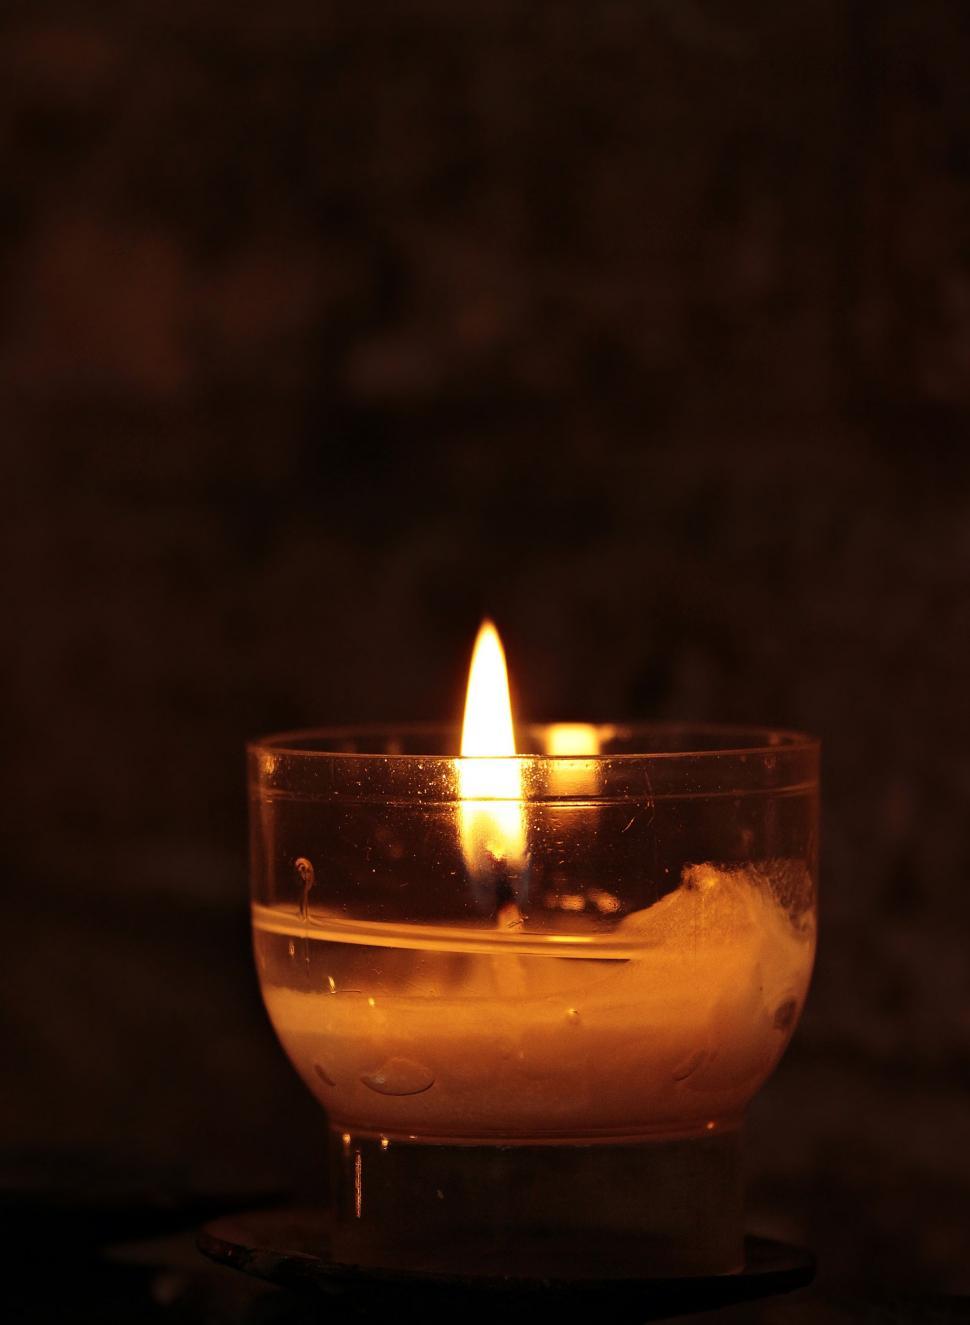 Lit tea candles and candles with copy space on black background Stock Photo  by Wavebreakmedia